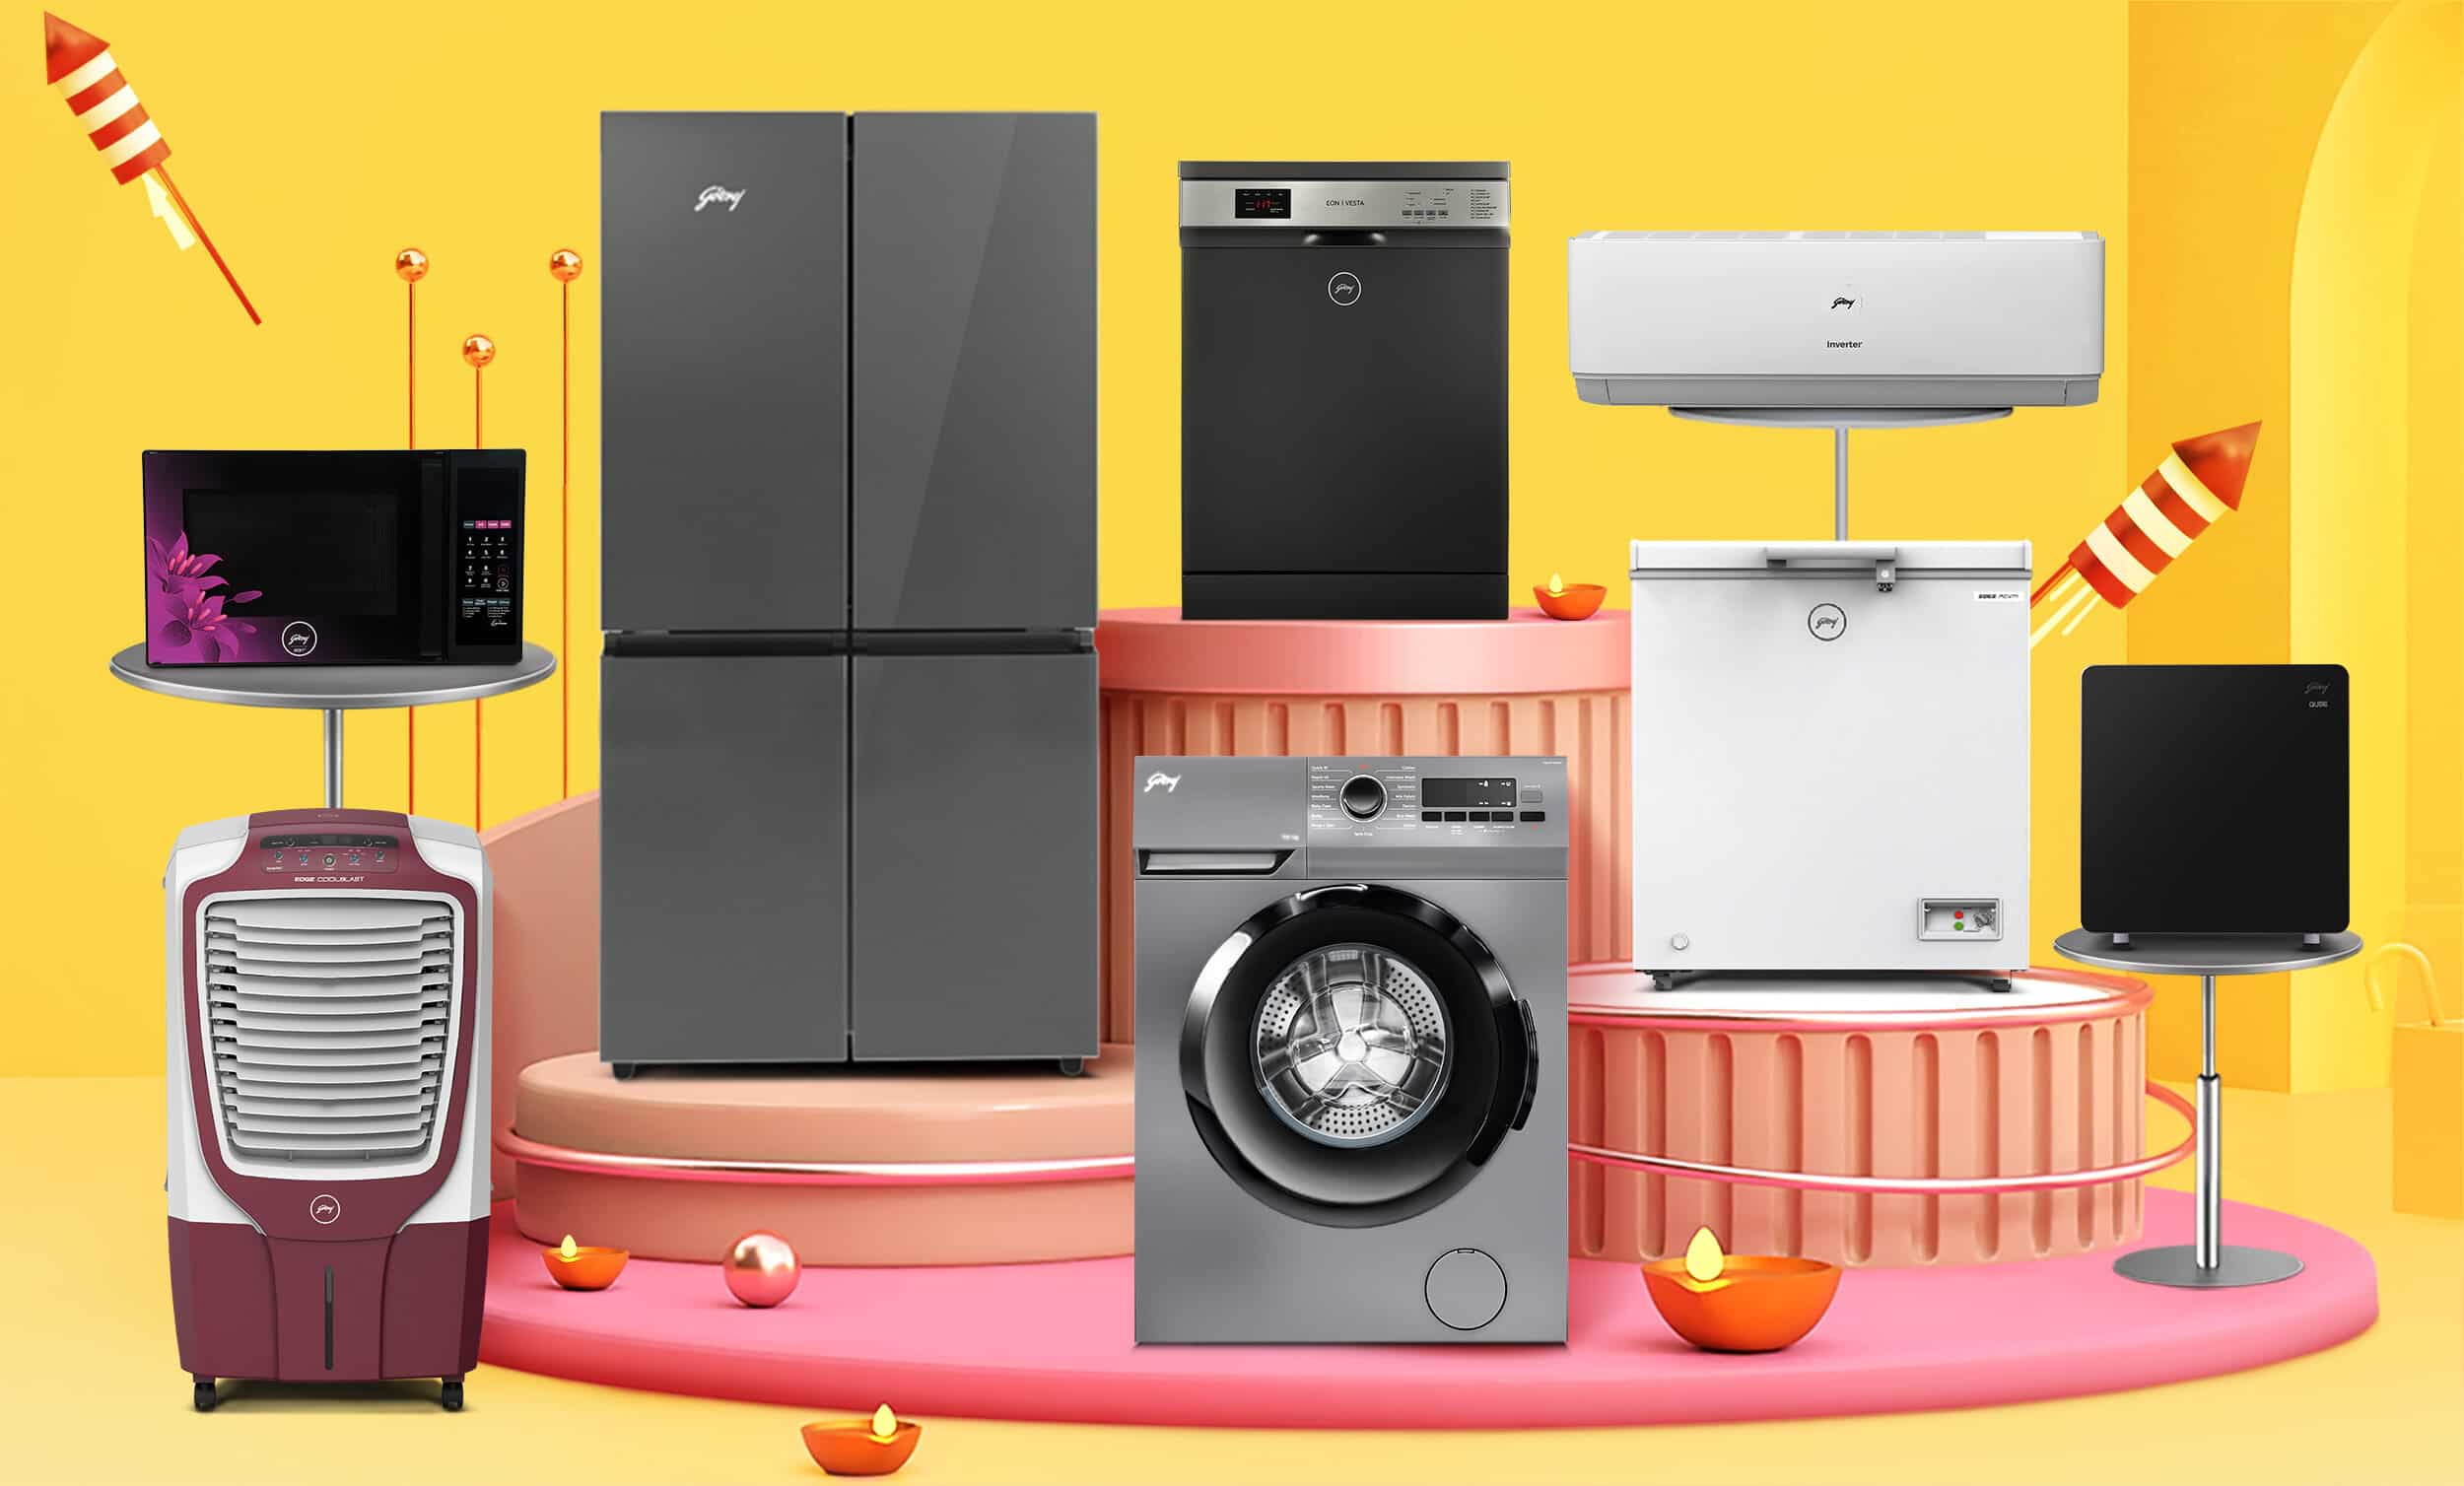 With 30% topline growth, Godrej Appliances expects to join billion-dollar club in FY25